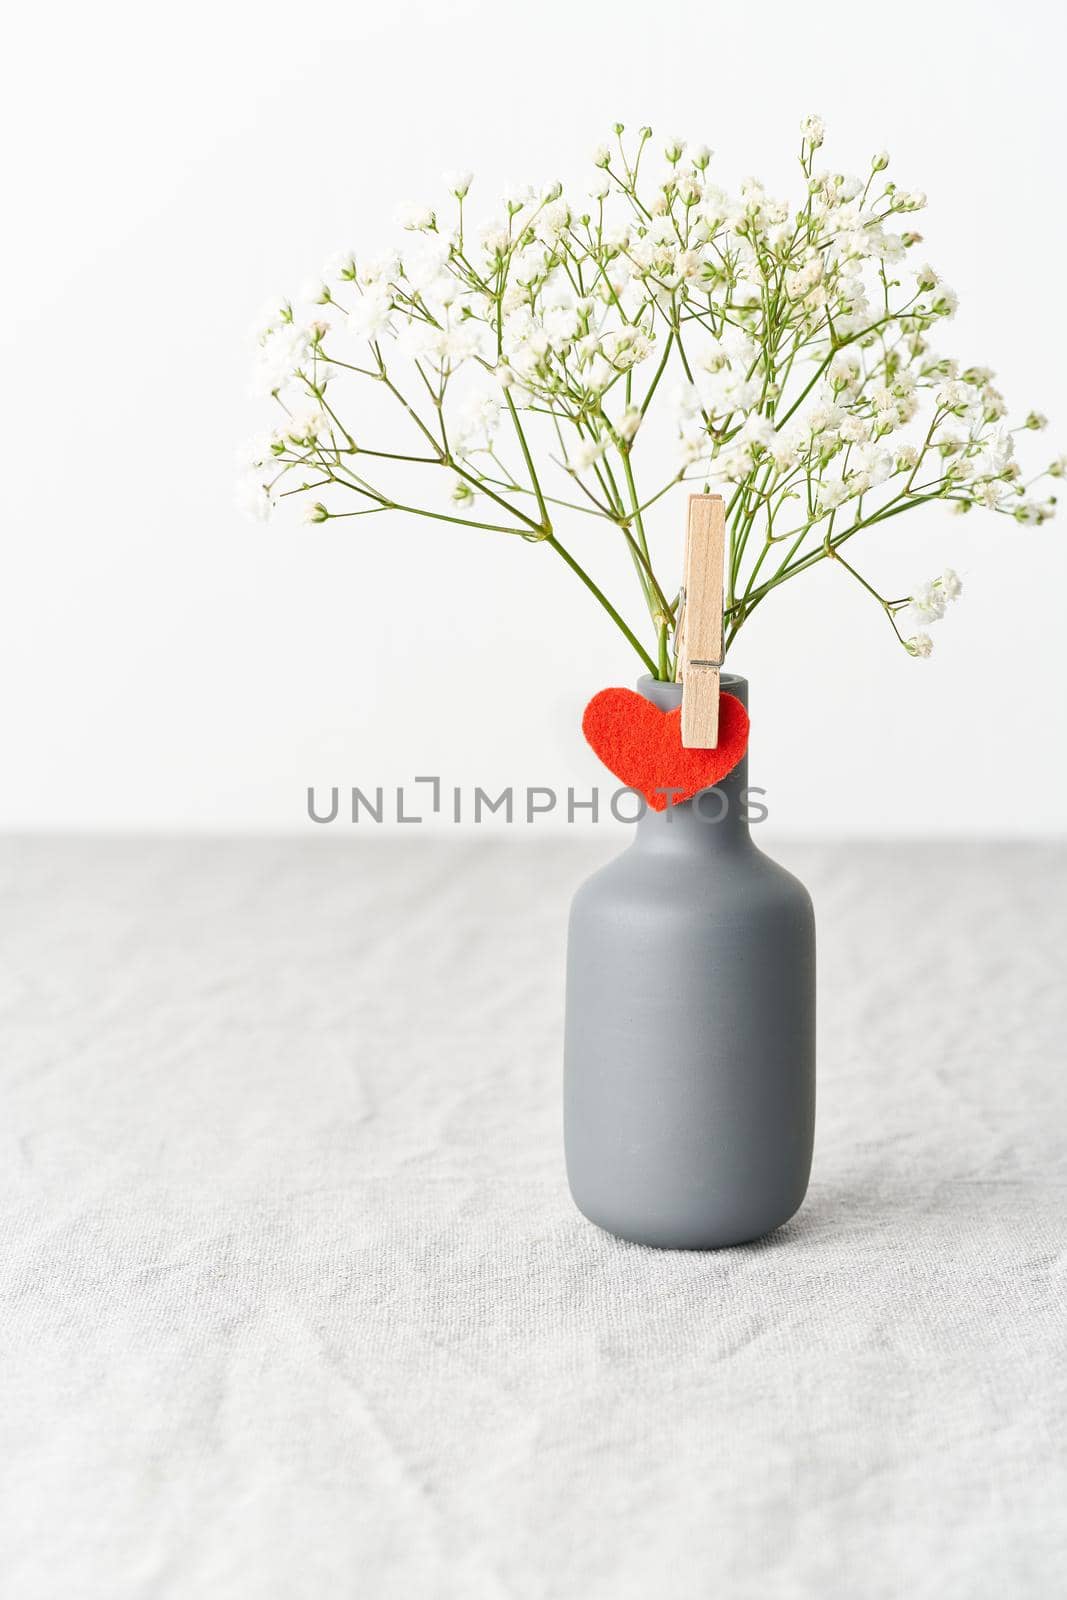 Valentine's Day. Delicate white flowers in a vase. Red felt heart - symbol of lovers. by NataBene